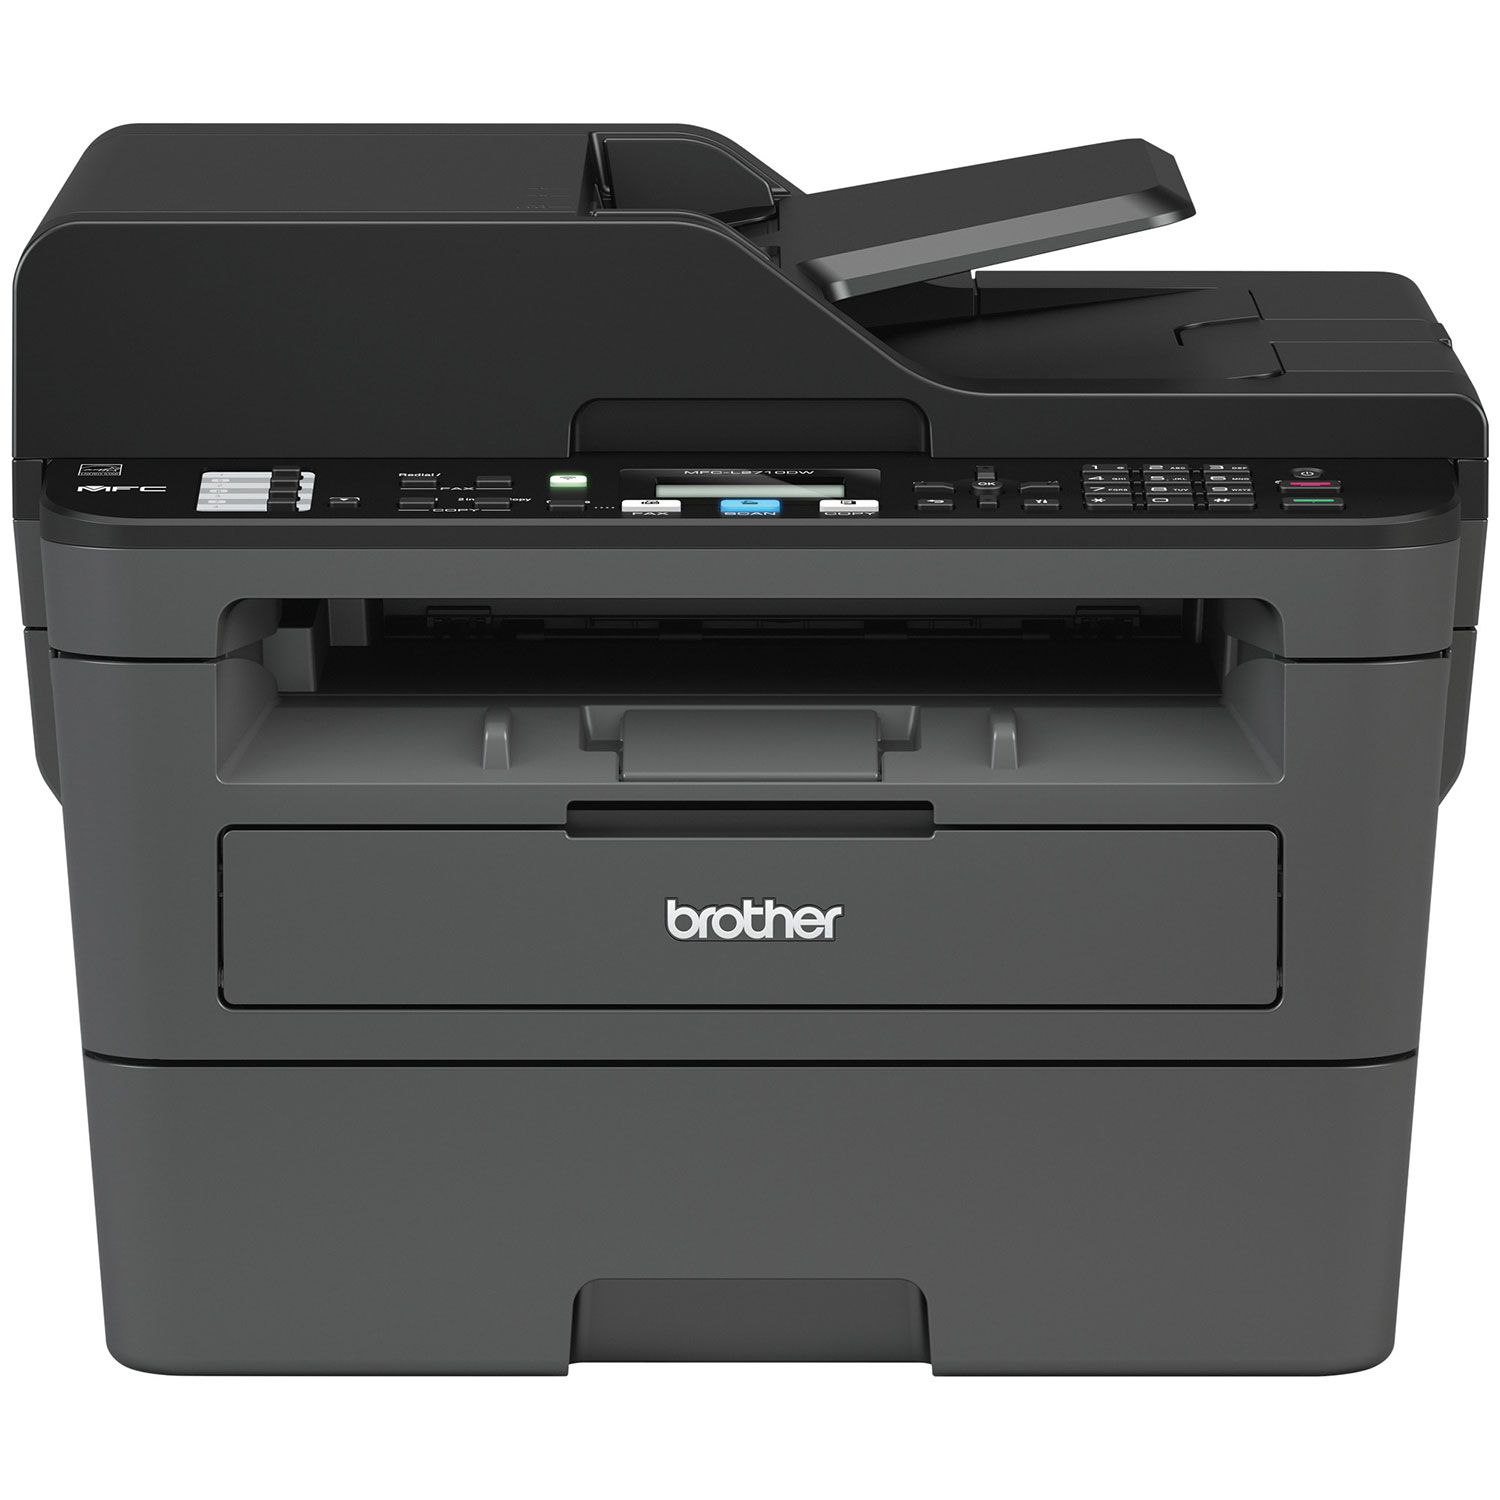 Brother Monochrome Wireless All-in-One Laser Printer (MFCL2710DW)